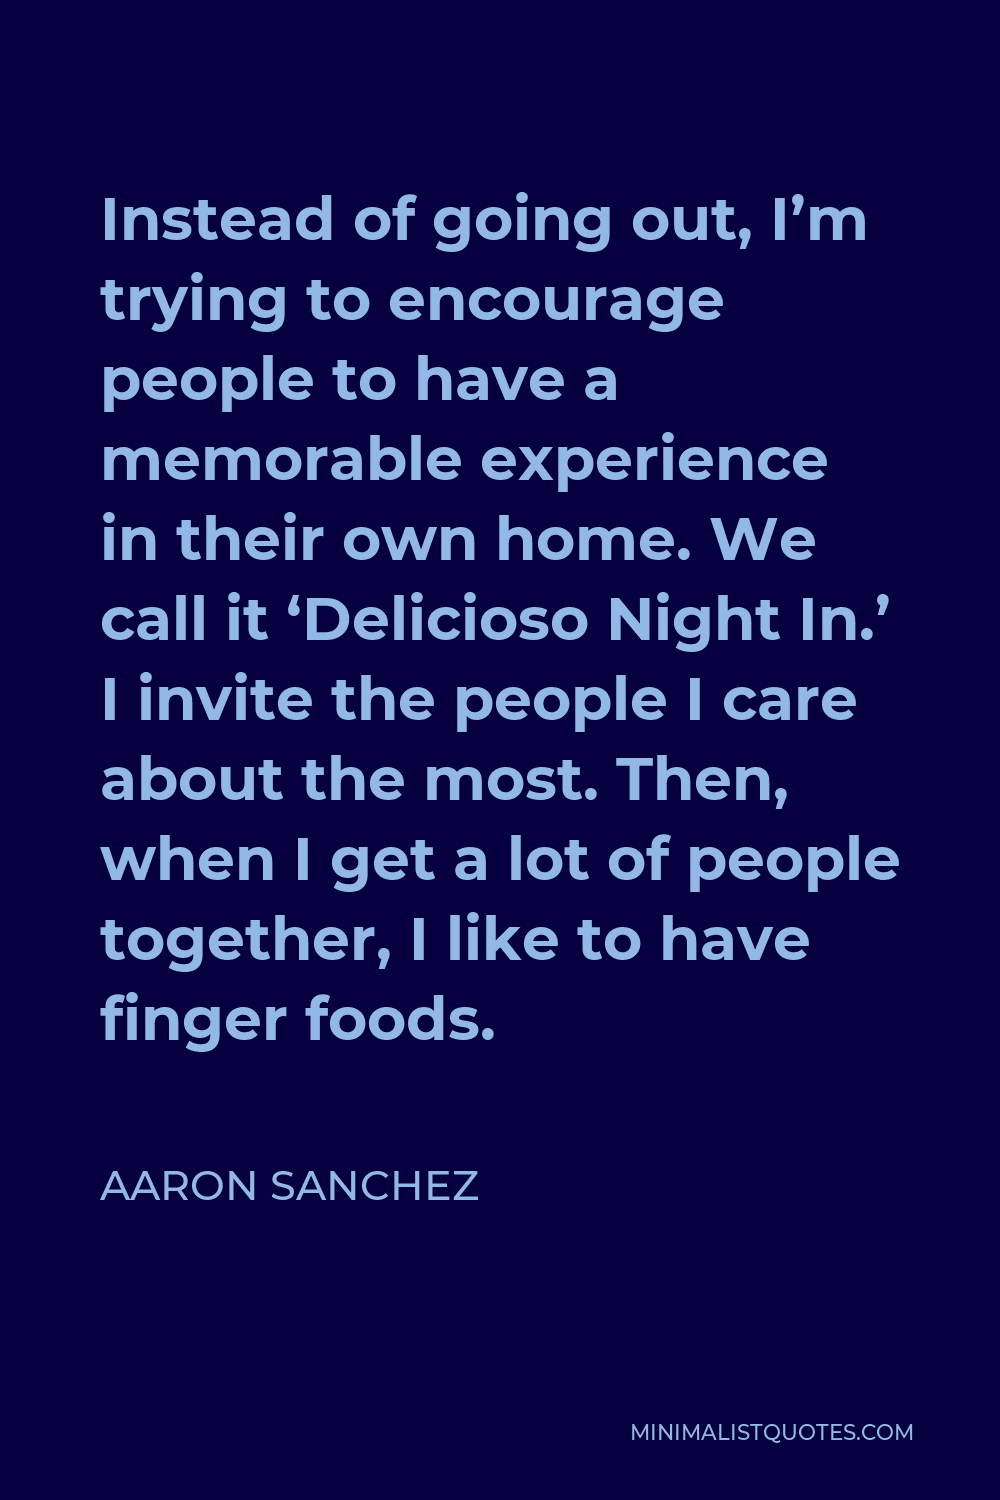 Aaron Sanchez Quote - Instead of going out, I’m trying to encourage people to have a memorable experience in their own home. We call it ‘Delicioso Night In.’ I invite the people I care about the most. Then, when I get a lot of people together, I like to have finger foods.